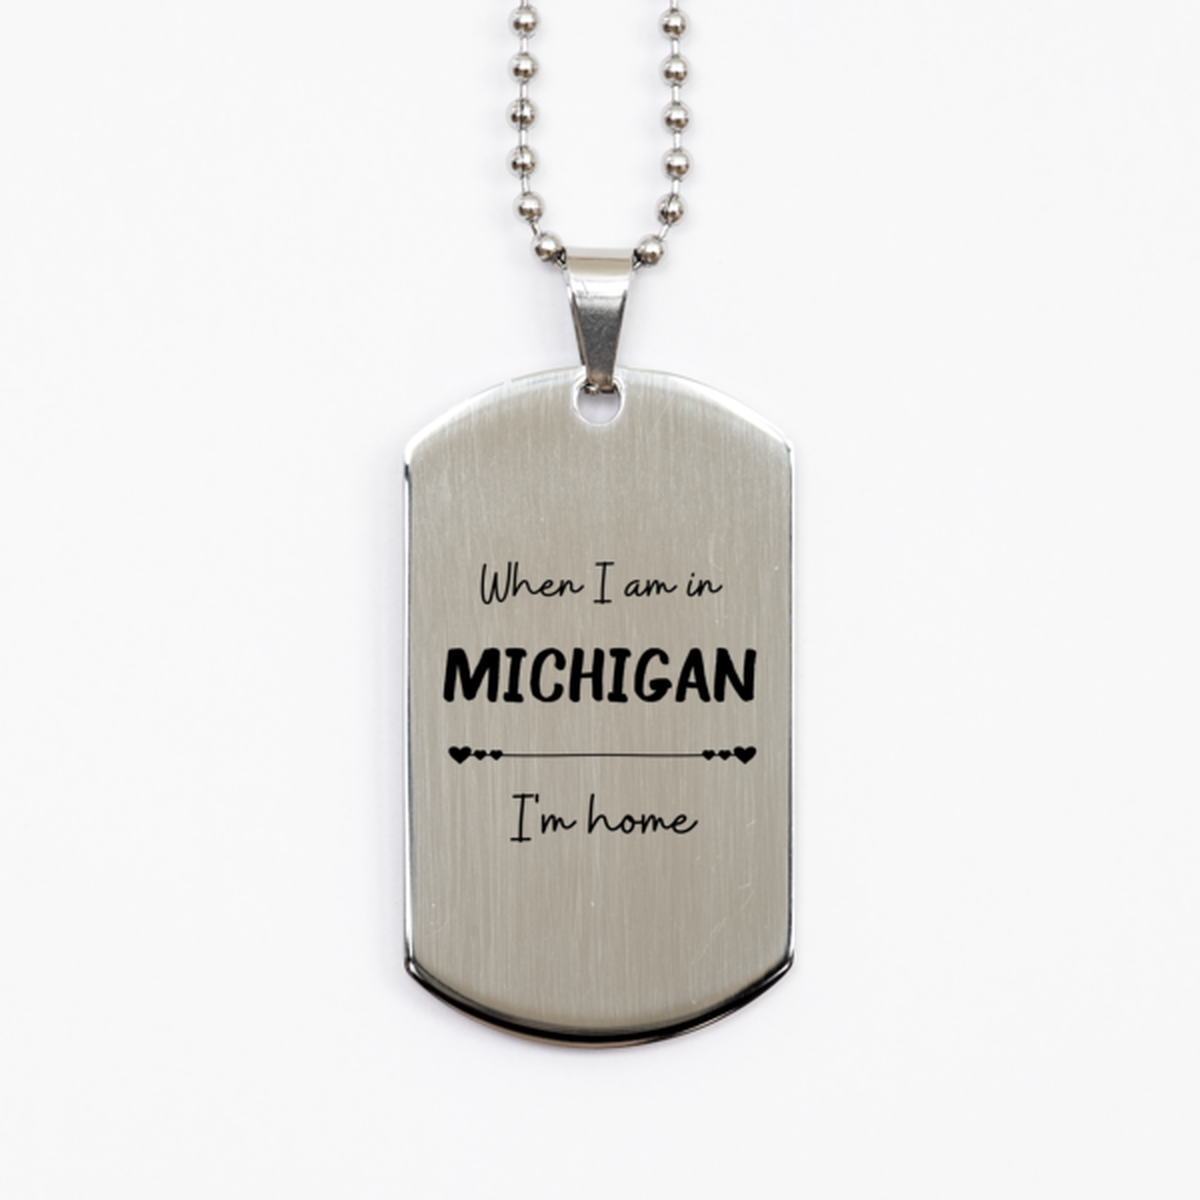 When I am in Michigan I'm home Silver Dog Tag, Cheap Gifts For Michigan, State Michigan Birthday Gifts for Friends Coworker